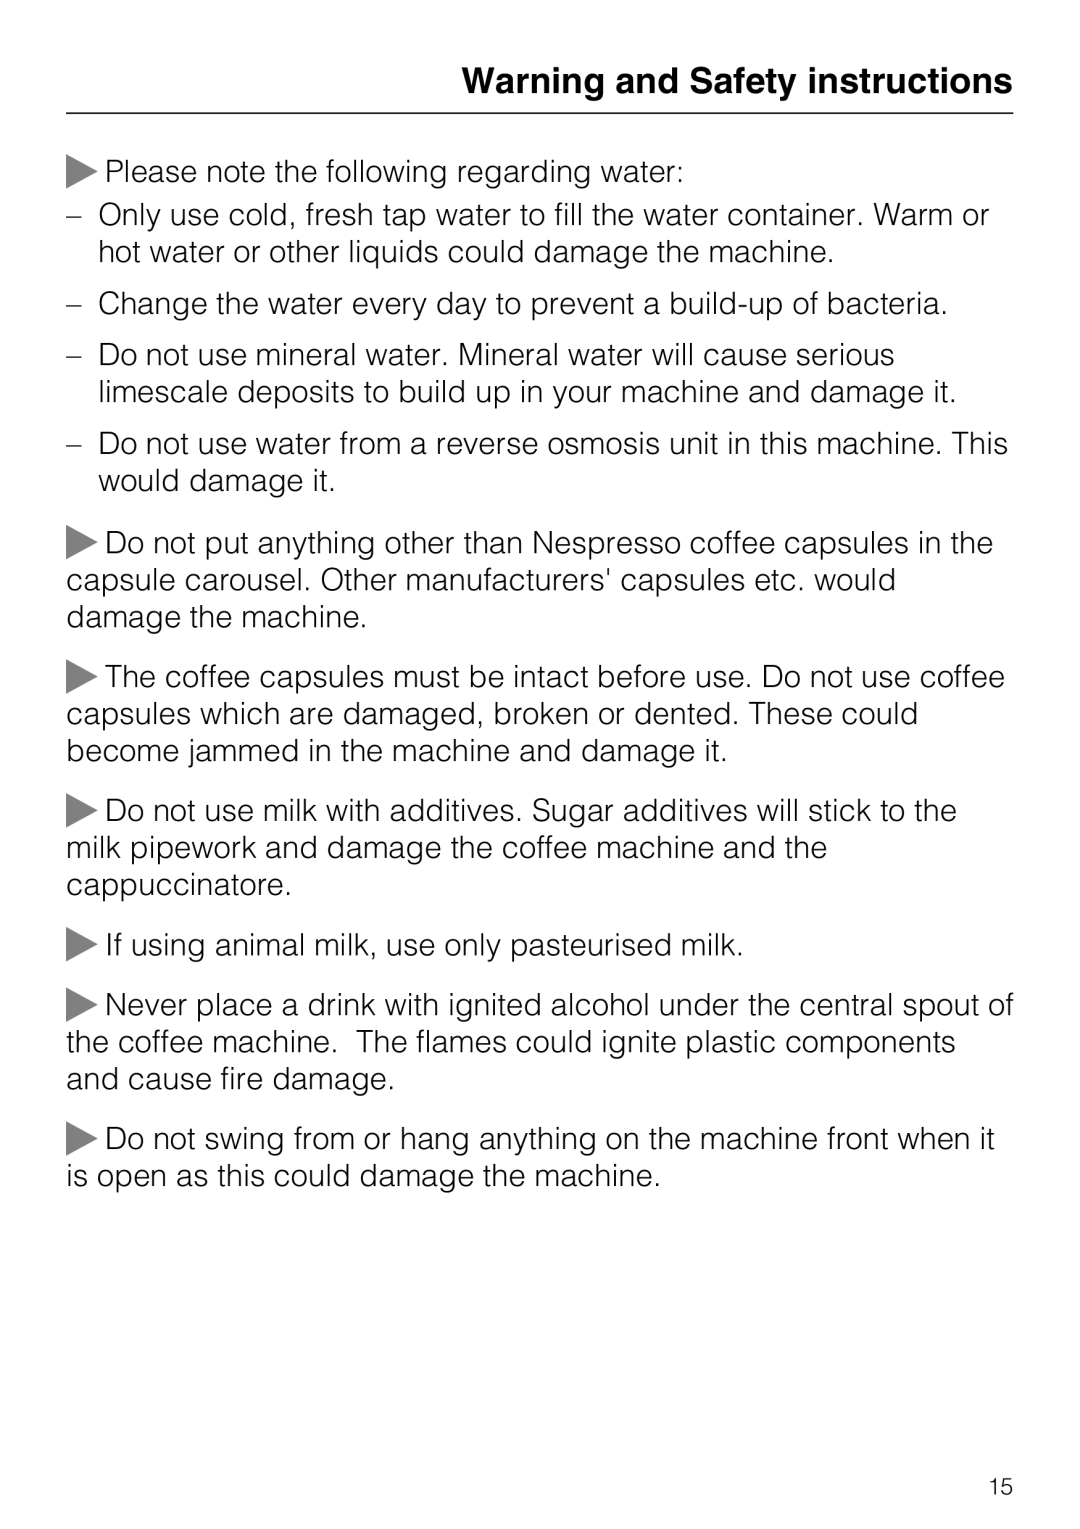 Miele CVA 6431 (C) installation instructions Warning and Safety instructions, ~Please note the following regarding water 